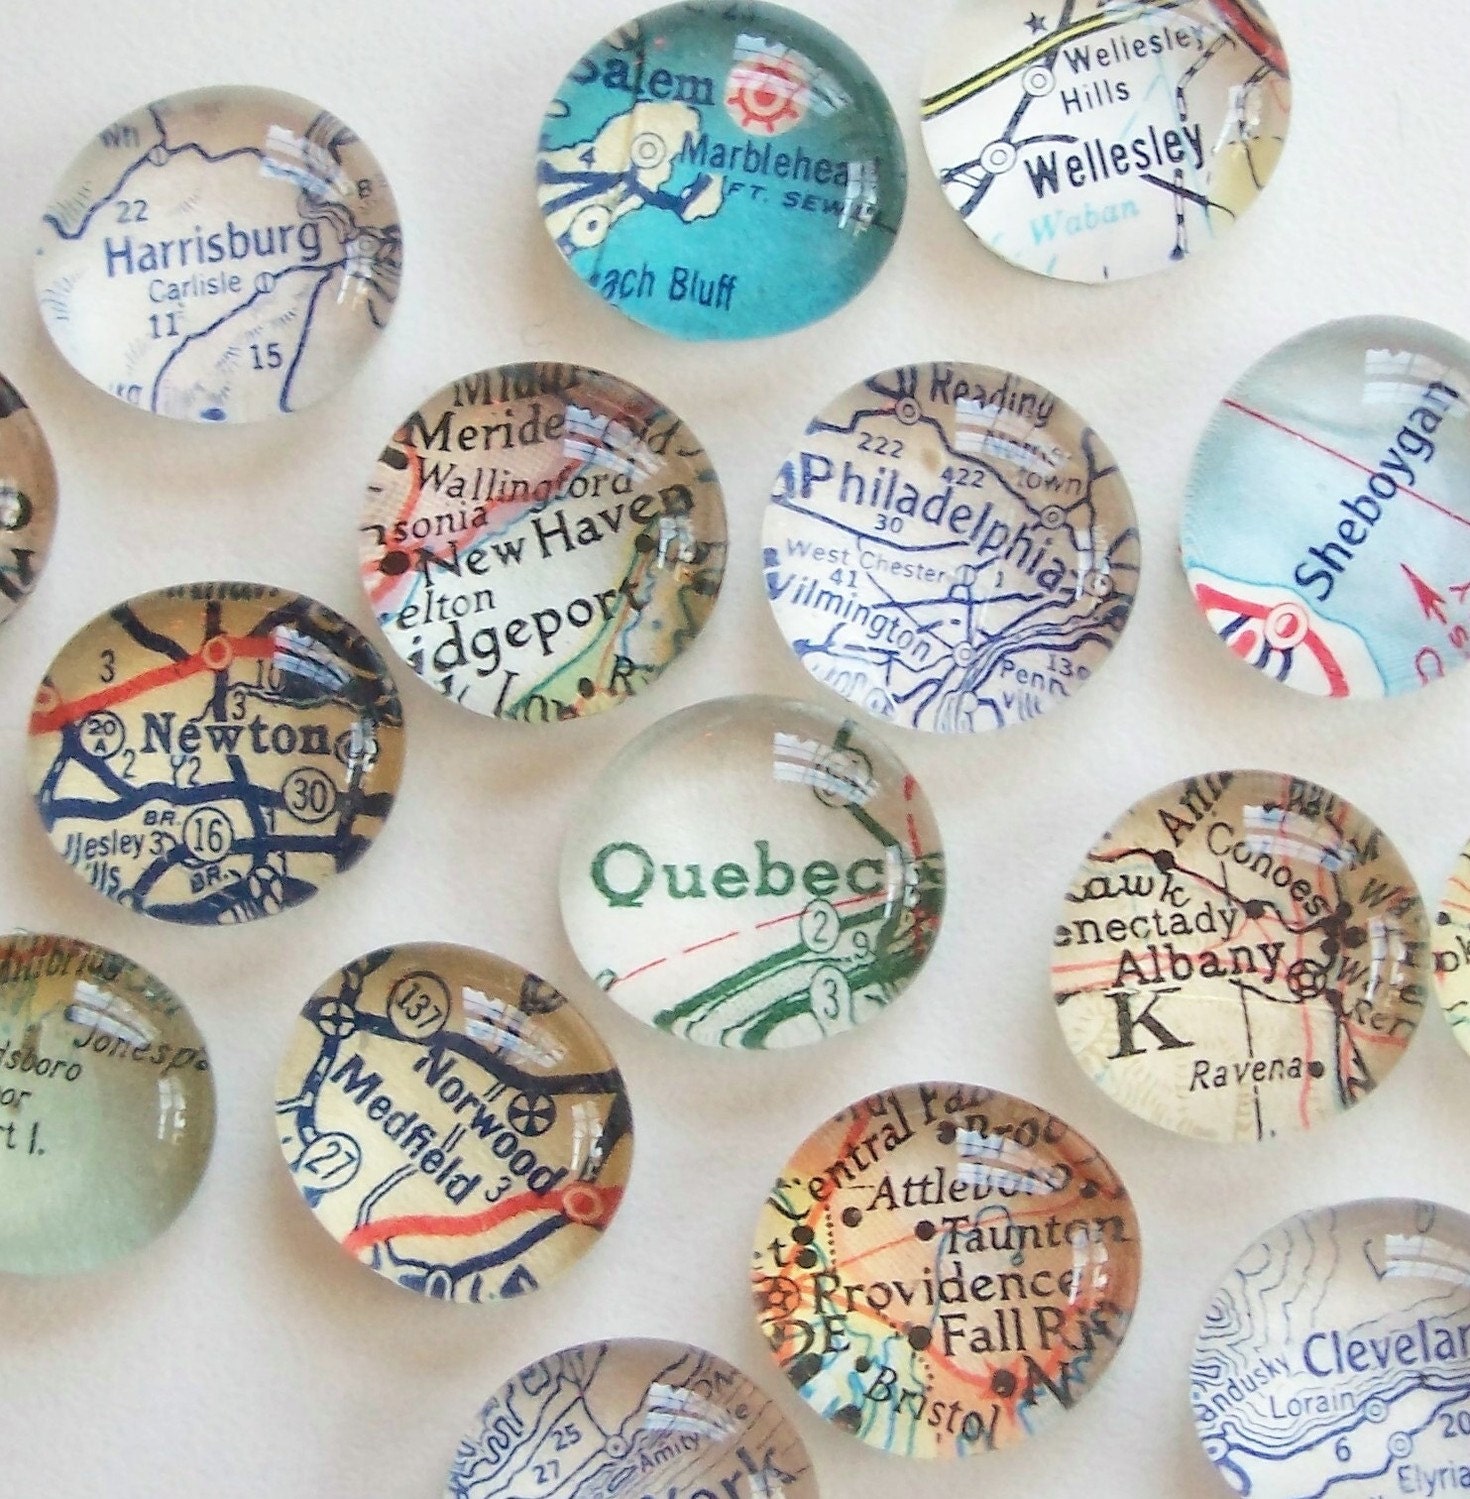 Vintage Map Magnets - Set of Four (you pick the regions) Perfect customized, personalized gift. 11 Diy-able Ideas For Using Maps and Mod Podge. Simplicity In The South.